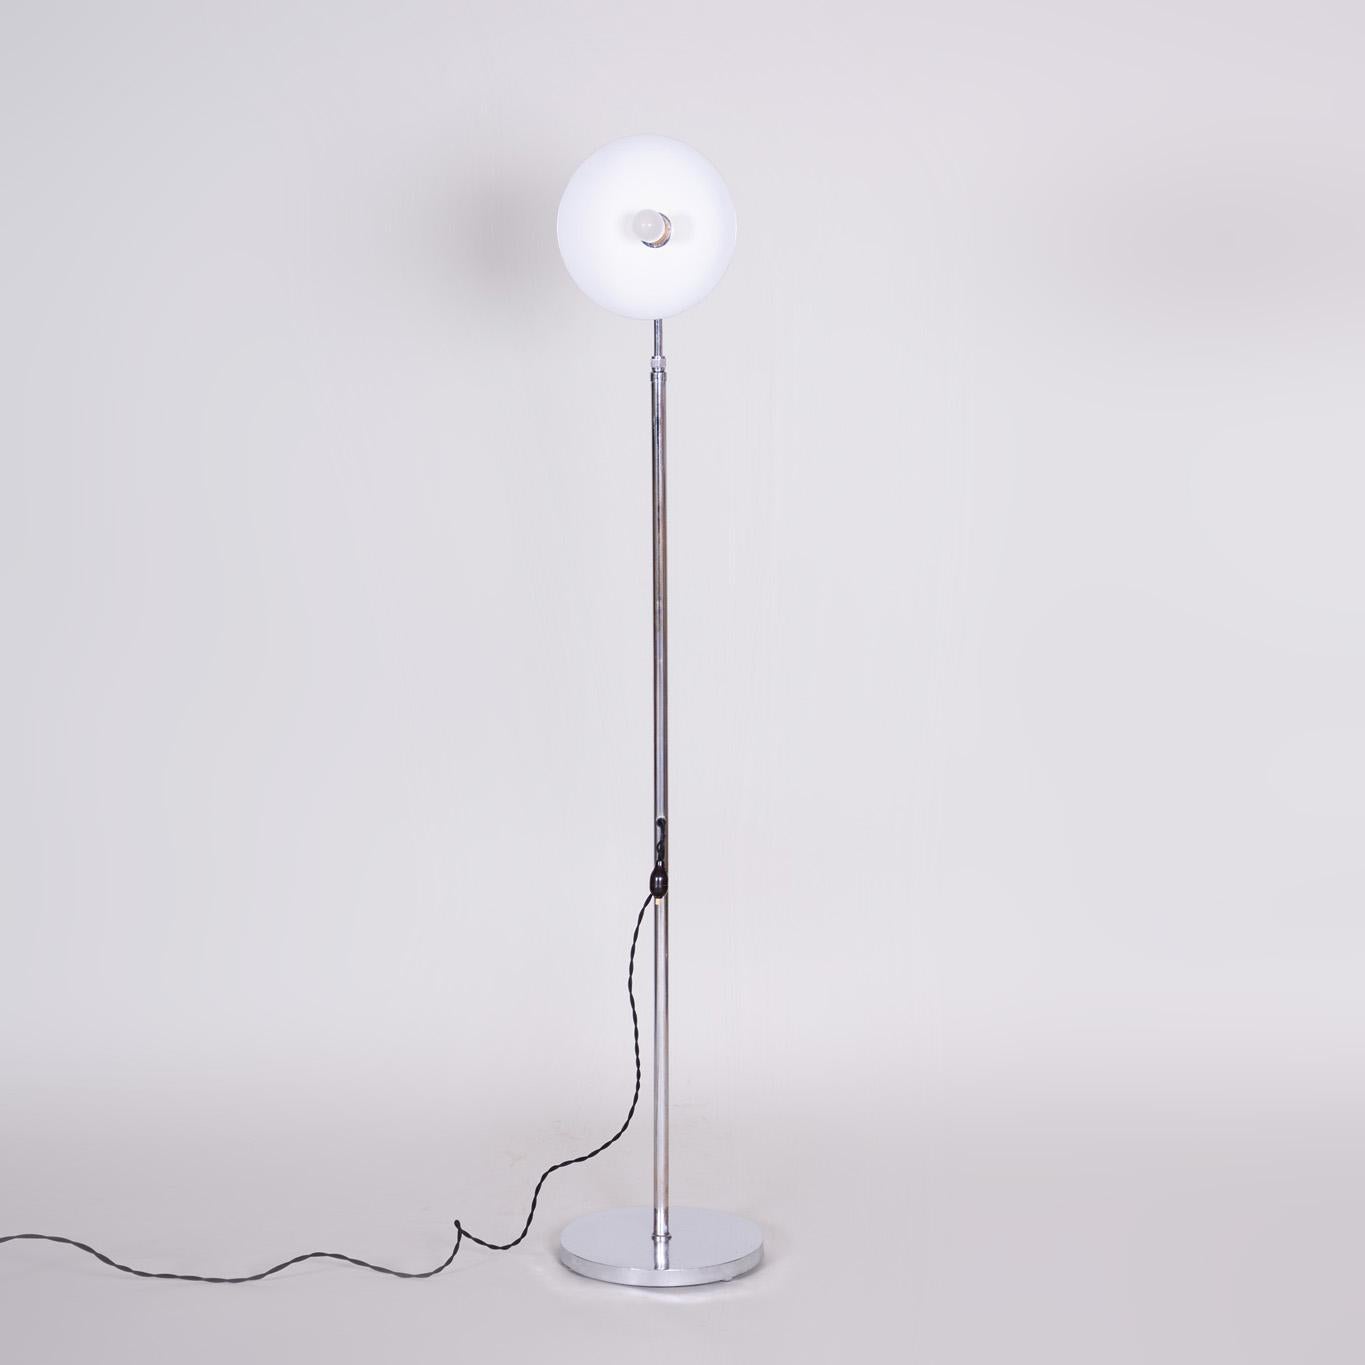 Restored Bauhaus Floor Lamp Made in the 1930s, Made Out of Chrome Plated Steel For Sale 1